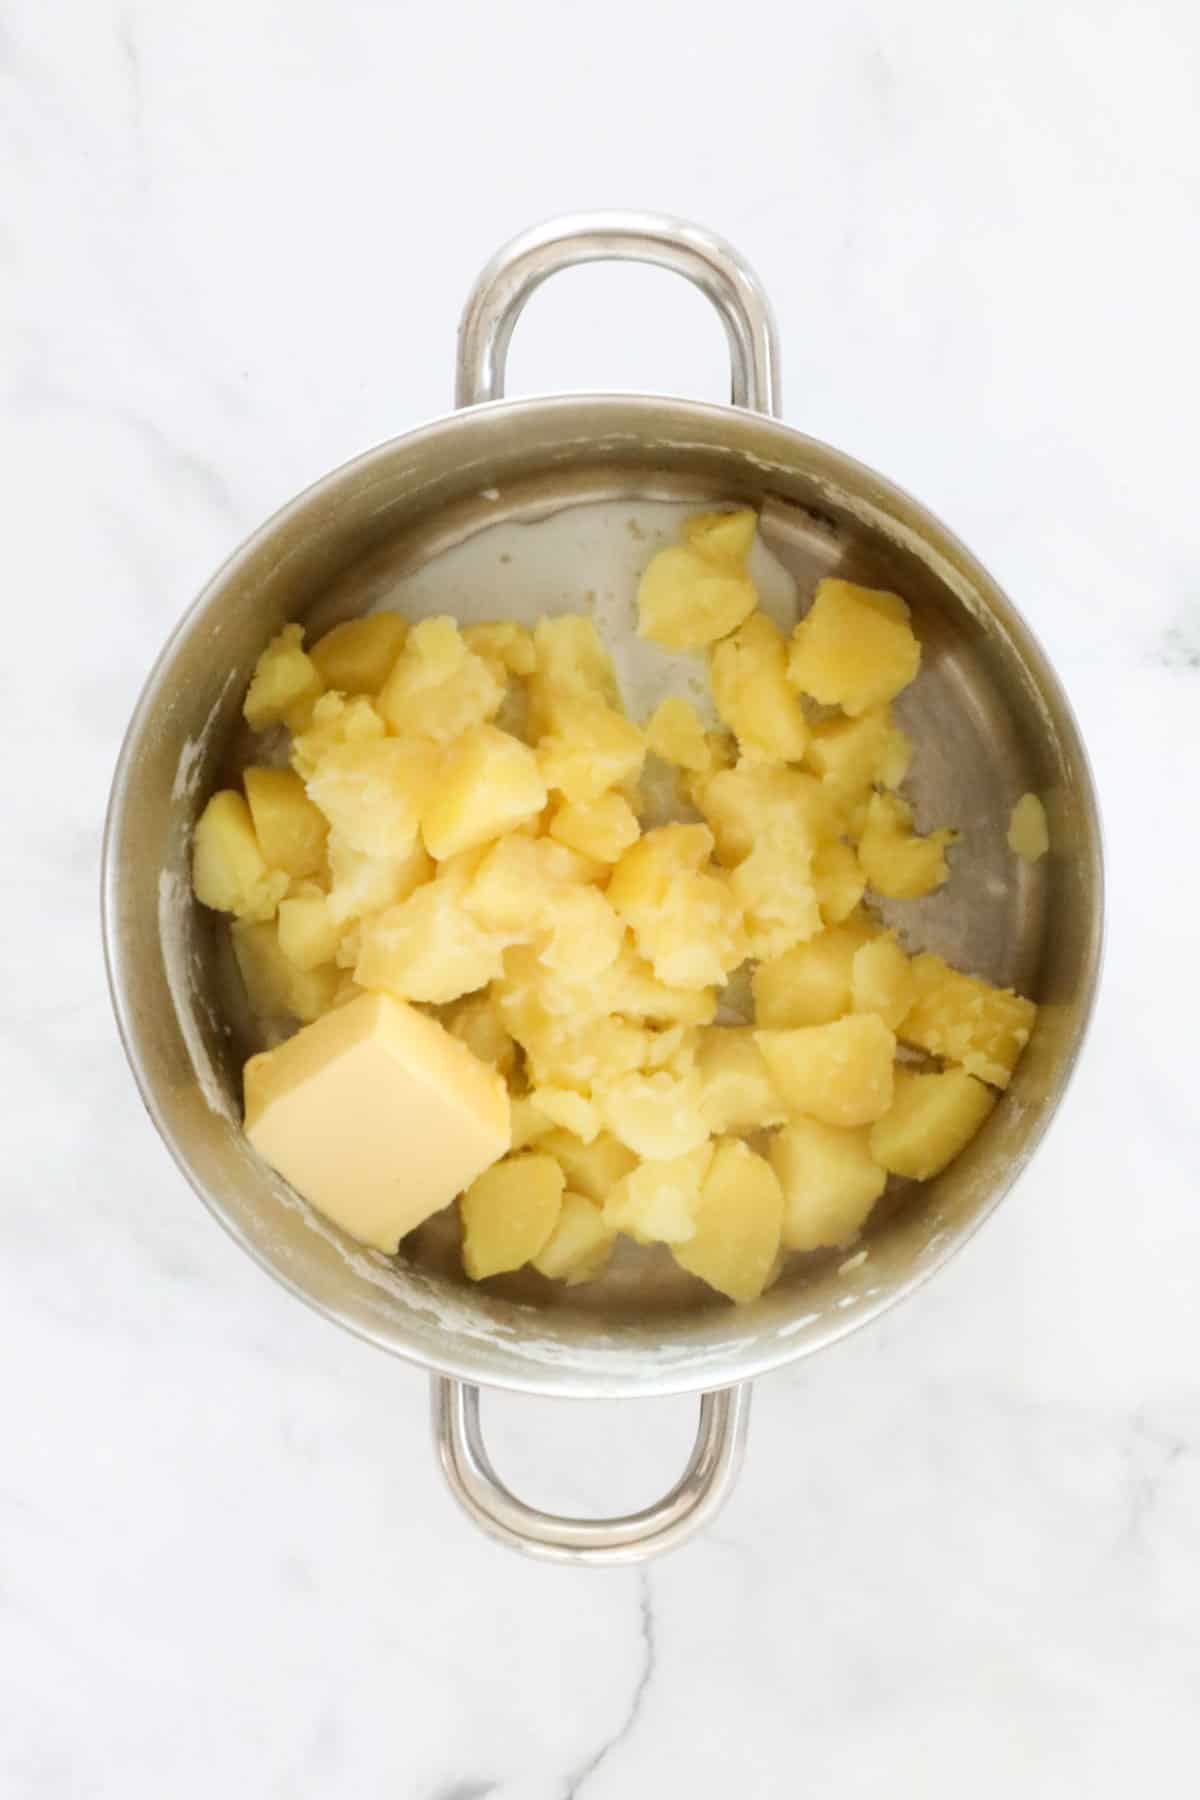 Butter on top of boiled potatoes.